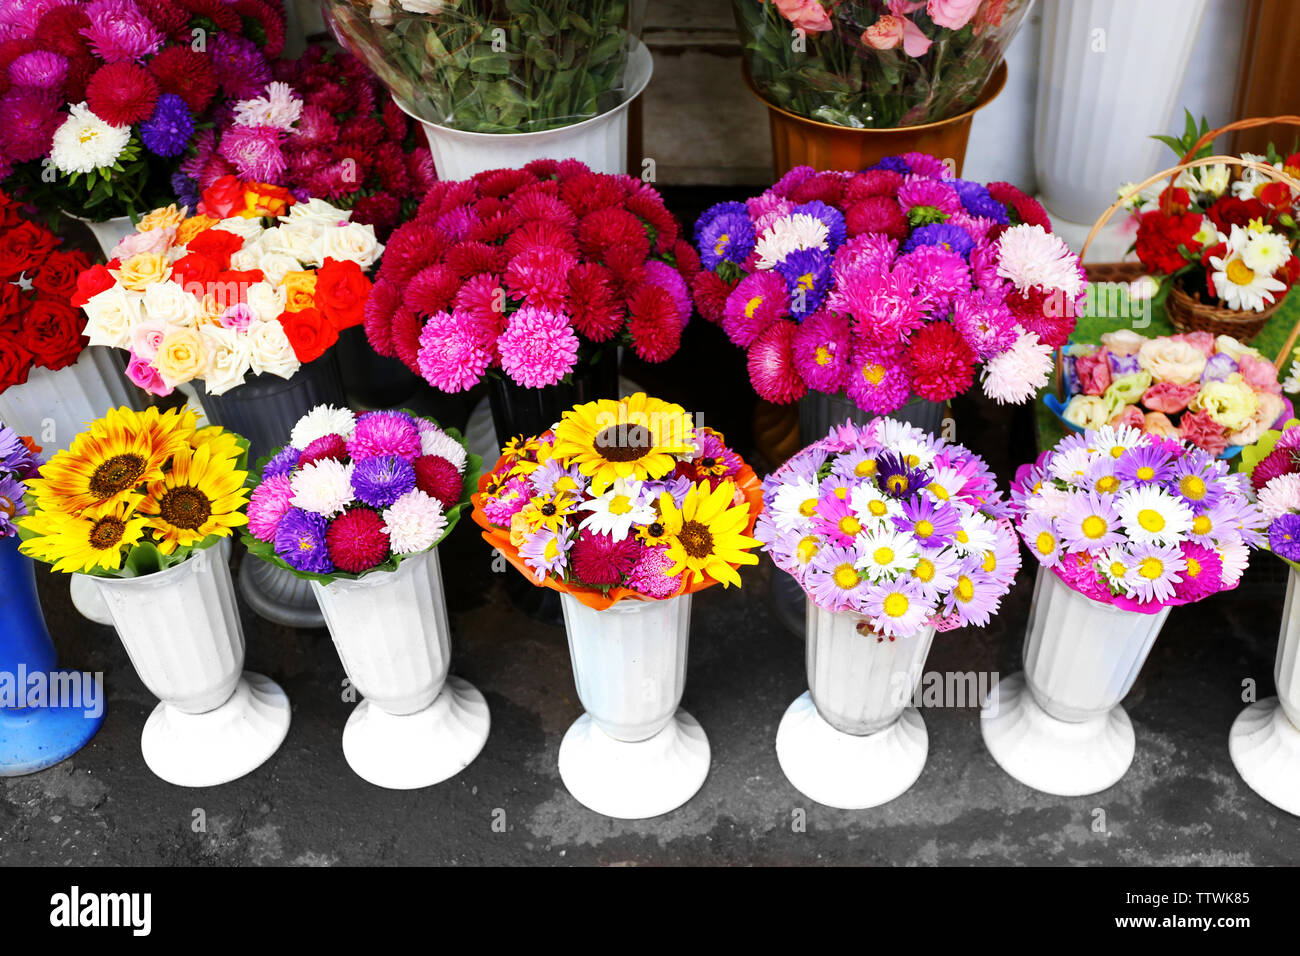 Fresh flowers on display outdoors Stock Photo